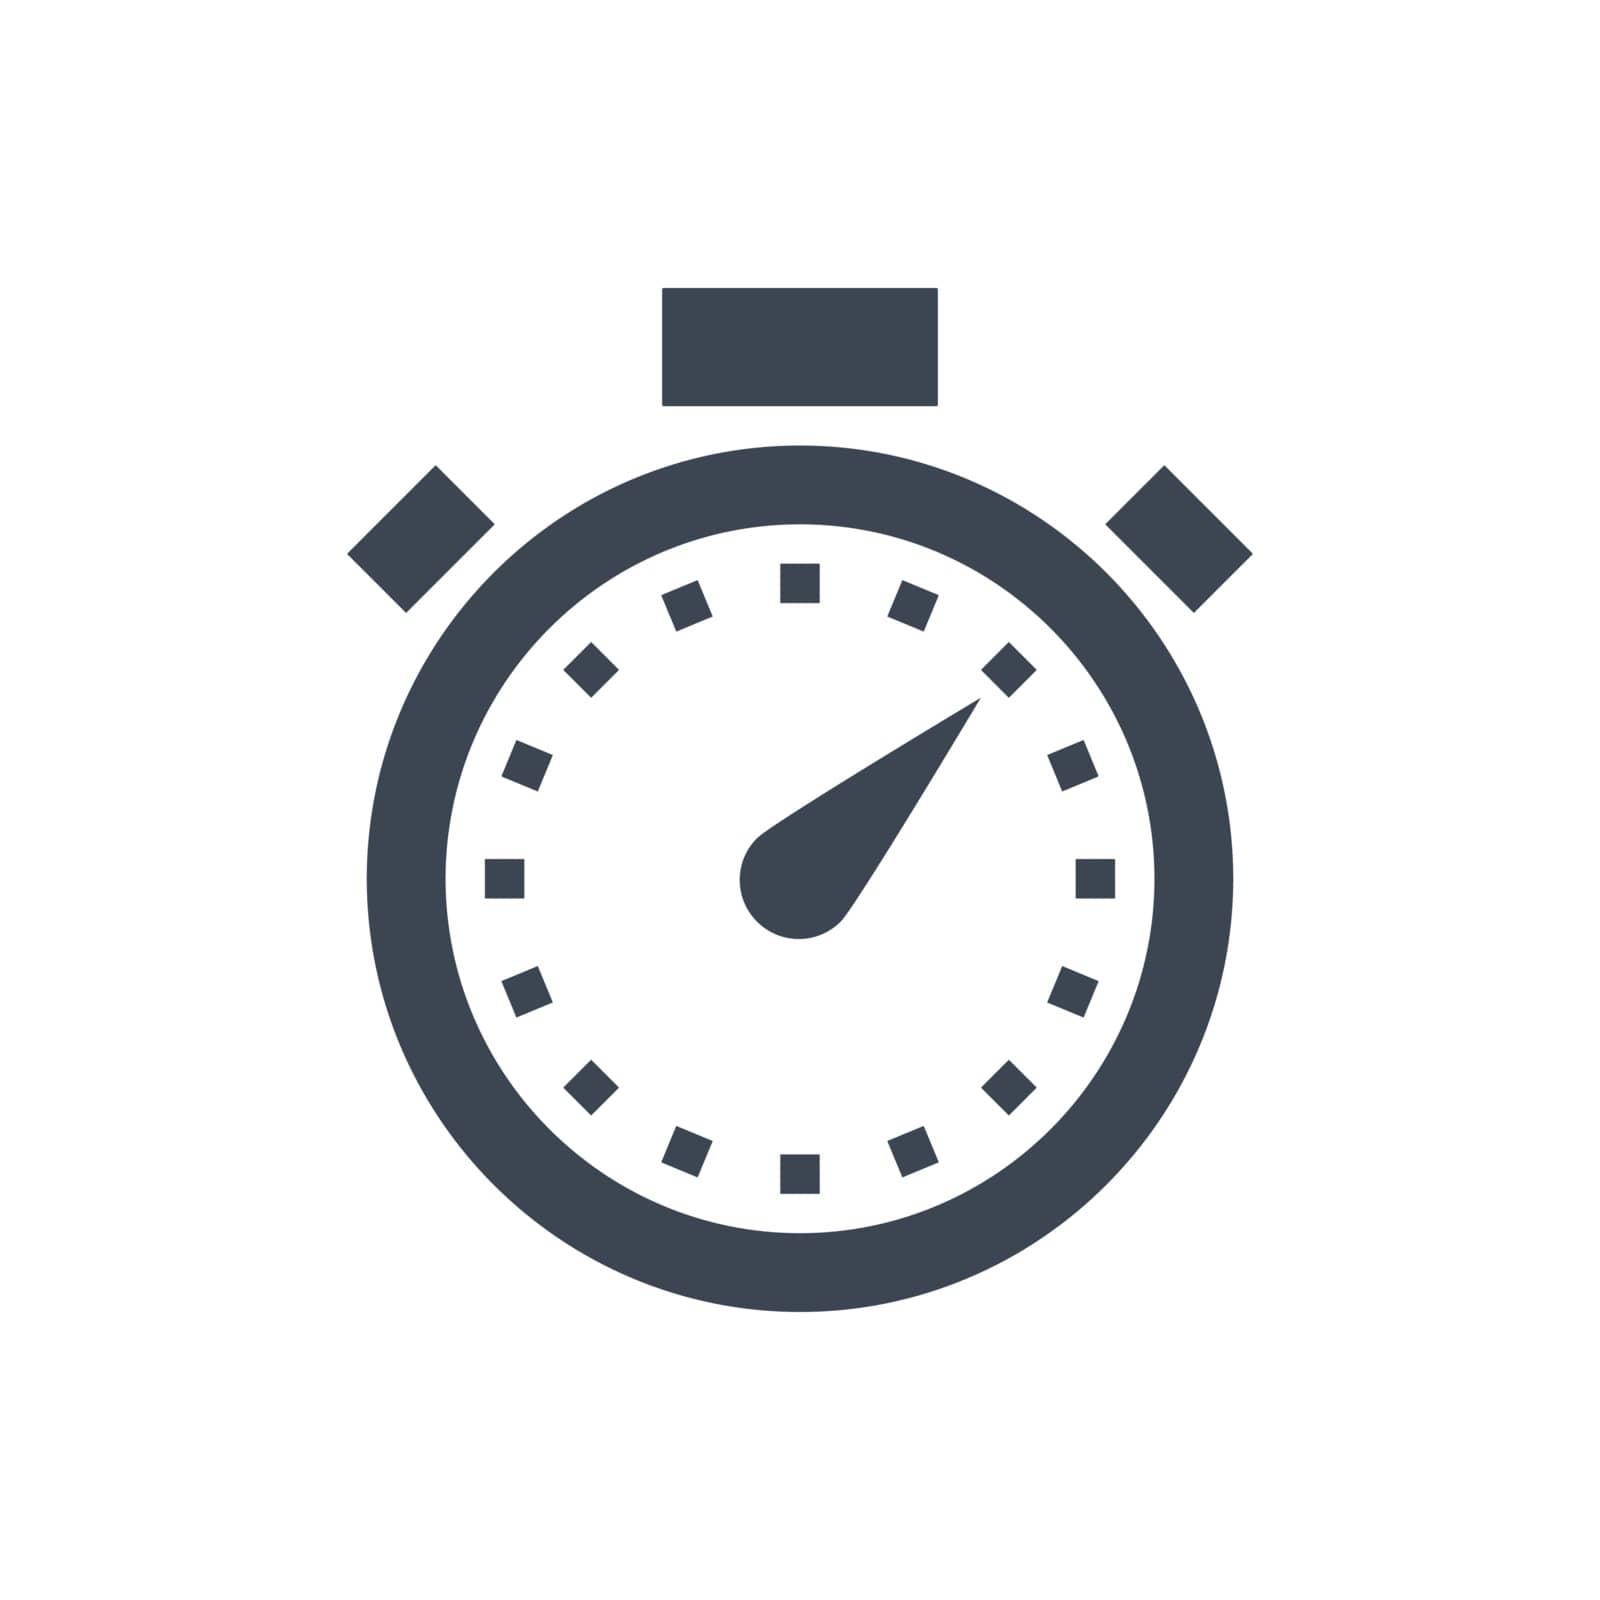 Stopwatch Related Vector Glyph Icon. Isolated on White Background. Vector Illustration.